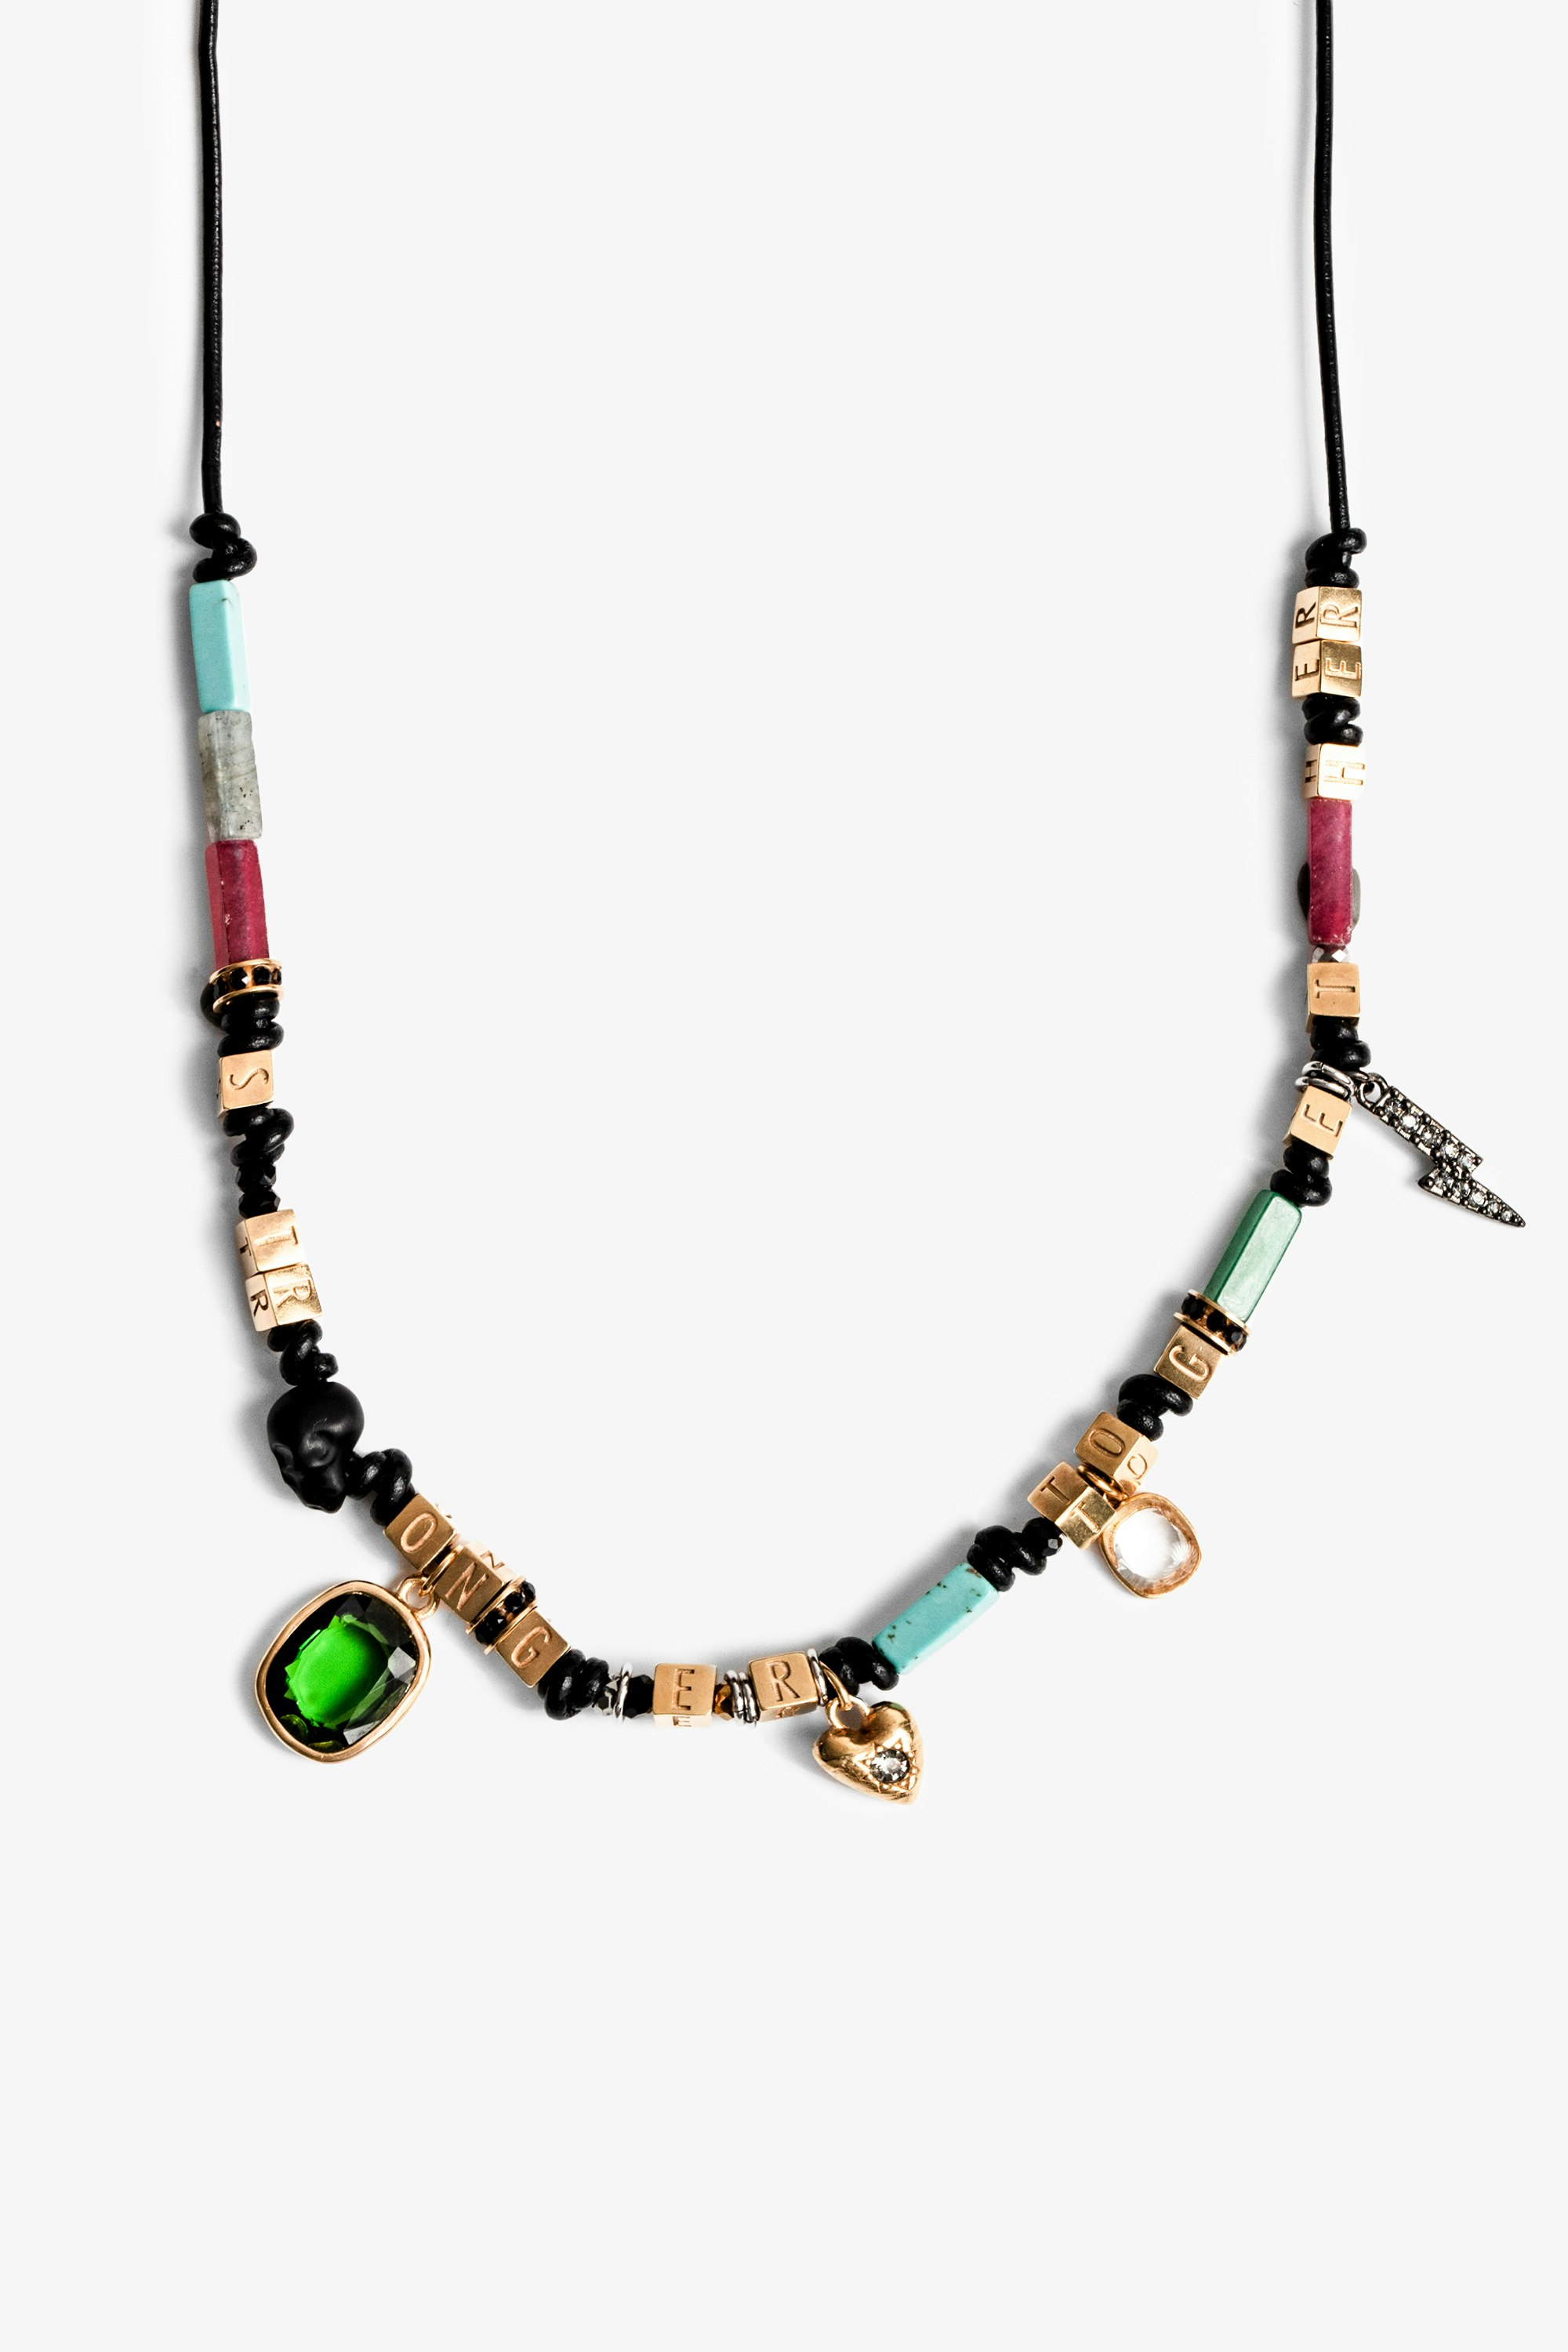 Mix n Match Full Charms Necklace - Cord necklace with metal charms and stones.